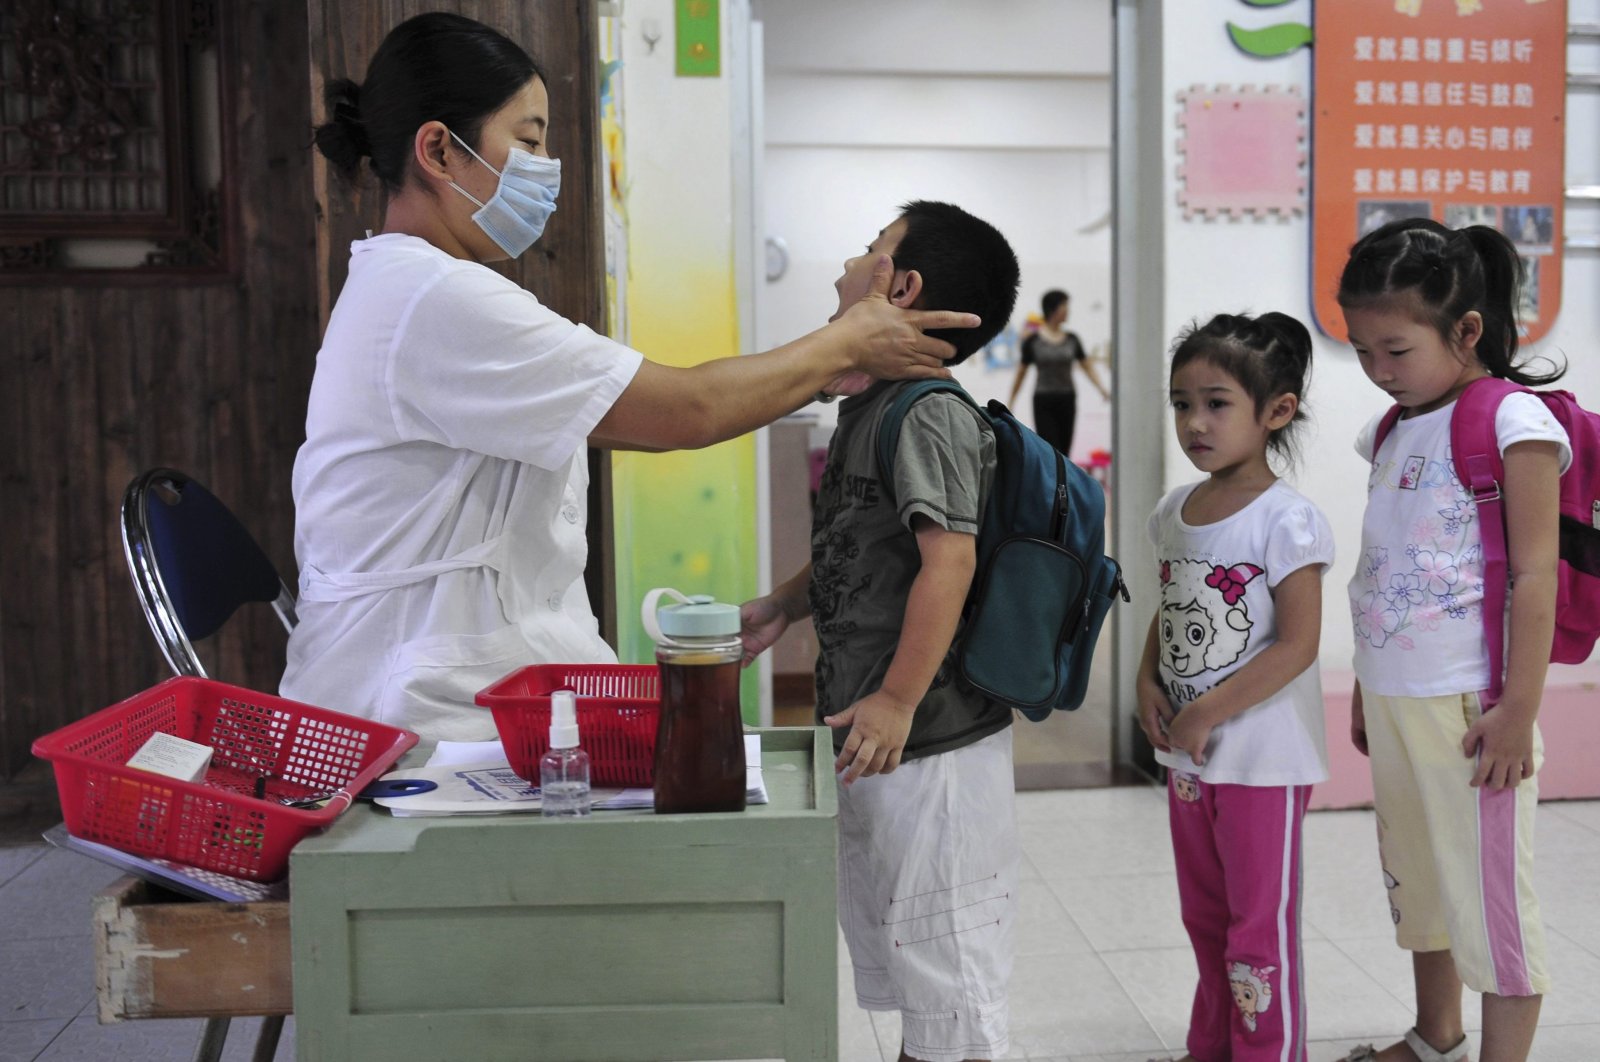 In this file photo, a teacher checks a child for symptoms of fever at a kindergarten as part of the routine precautions against swine flu (H1N1) in Fuzhou, southeast China's Fujian province, Sept. 22, 2009.